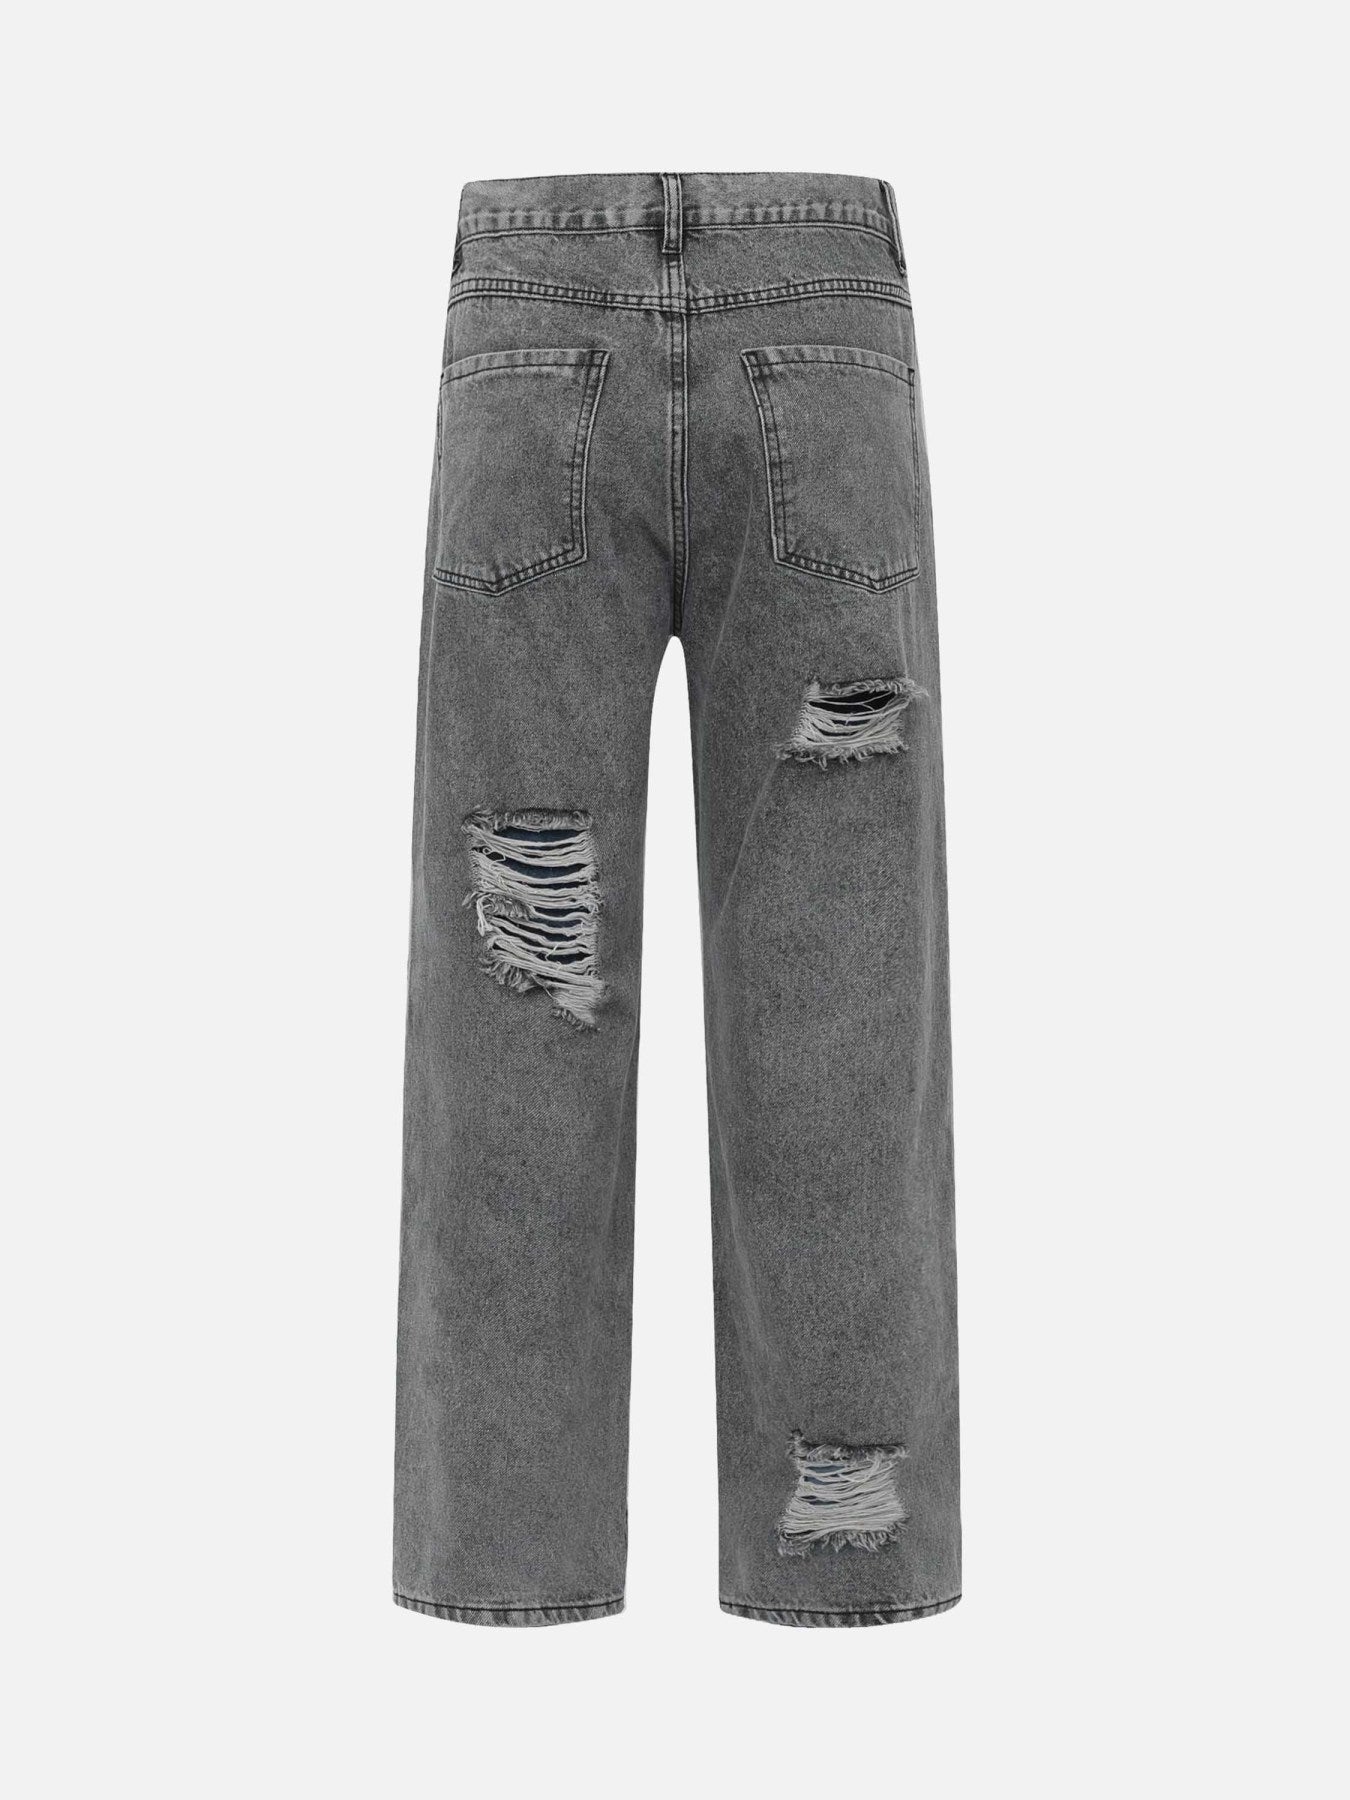 Thesupermade Washed And Patched Ripped Jeans - 1707